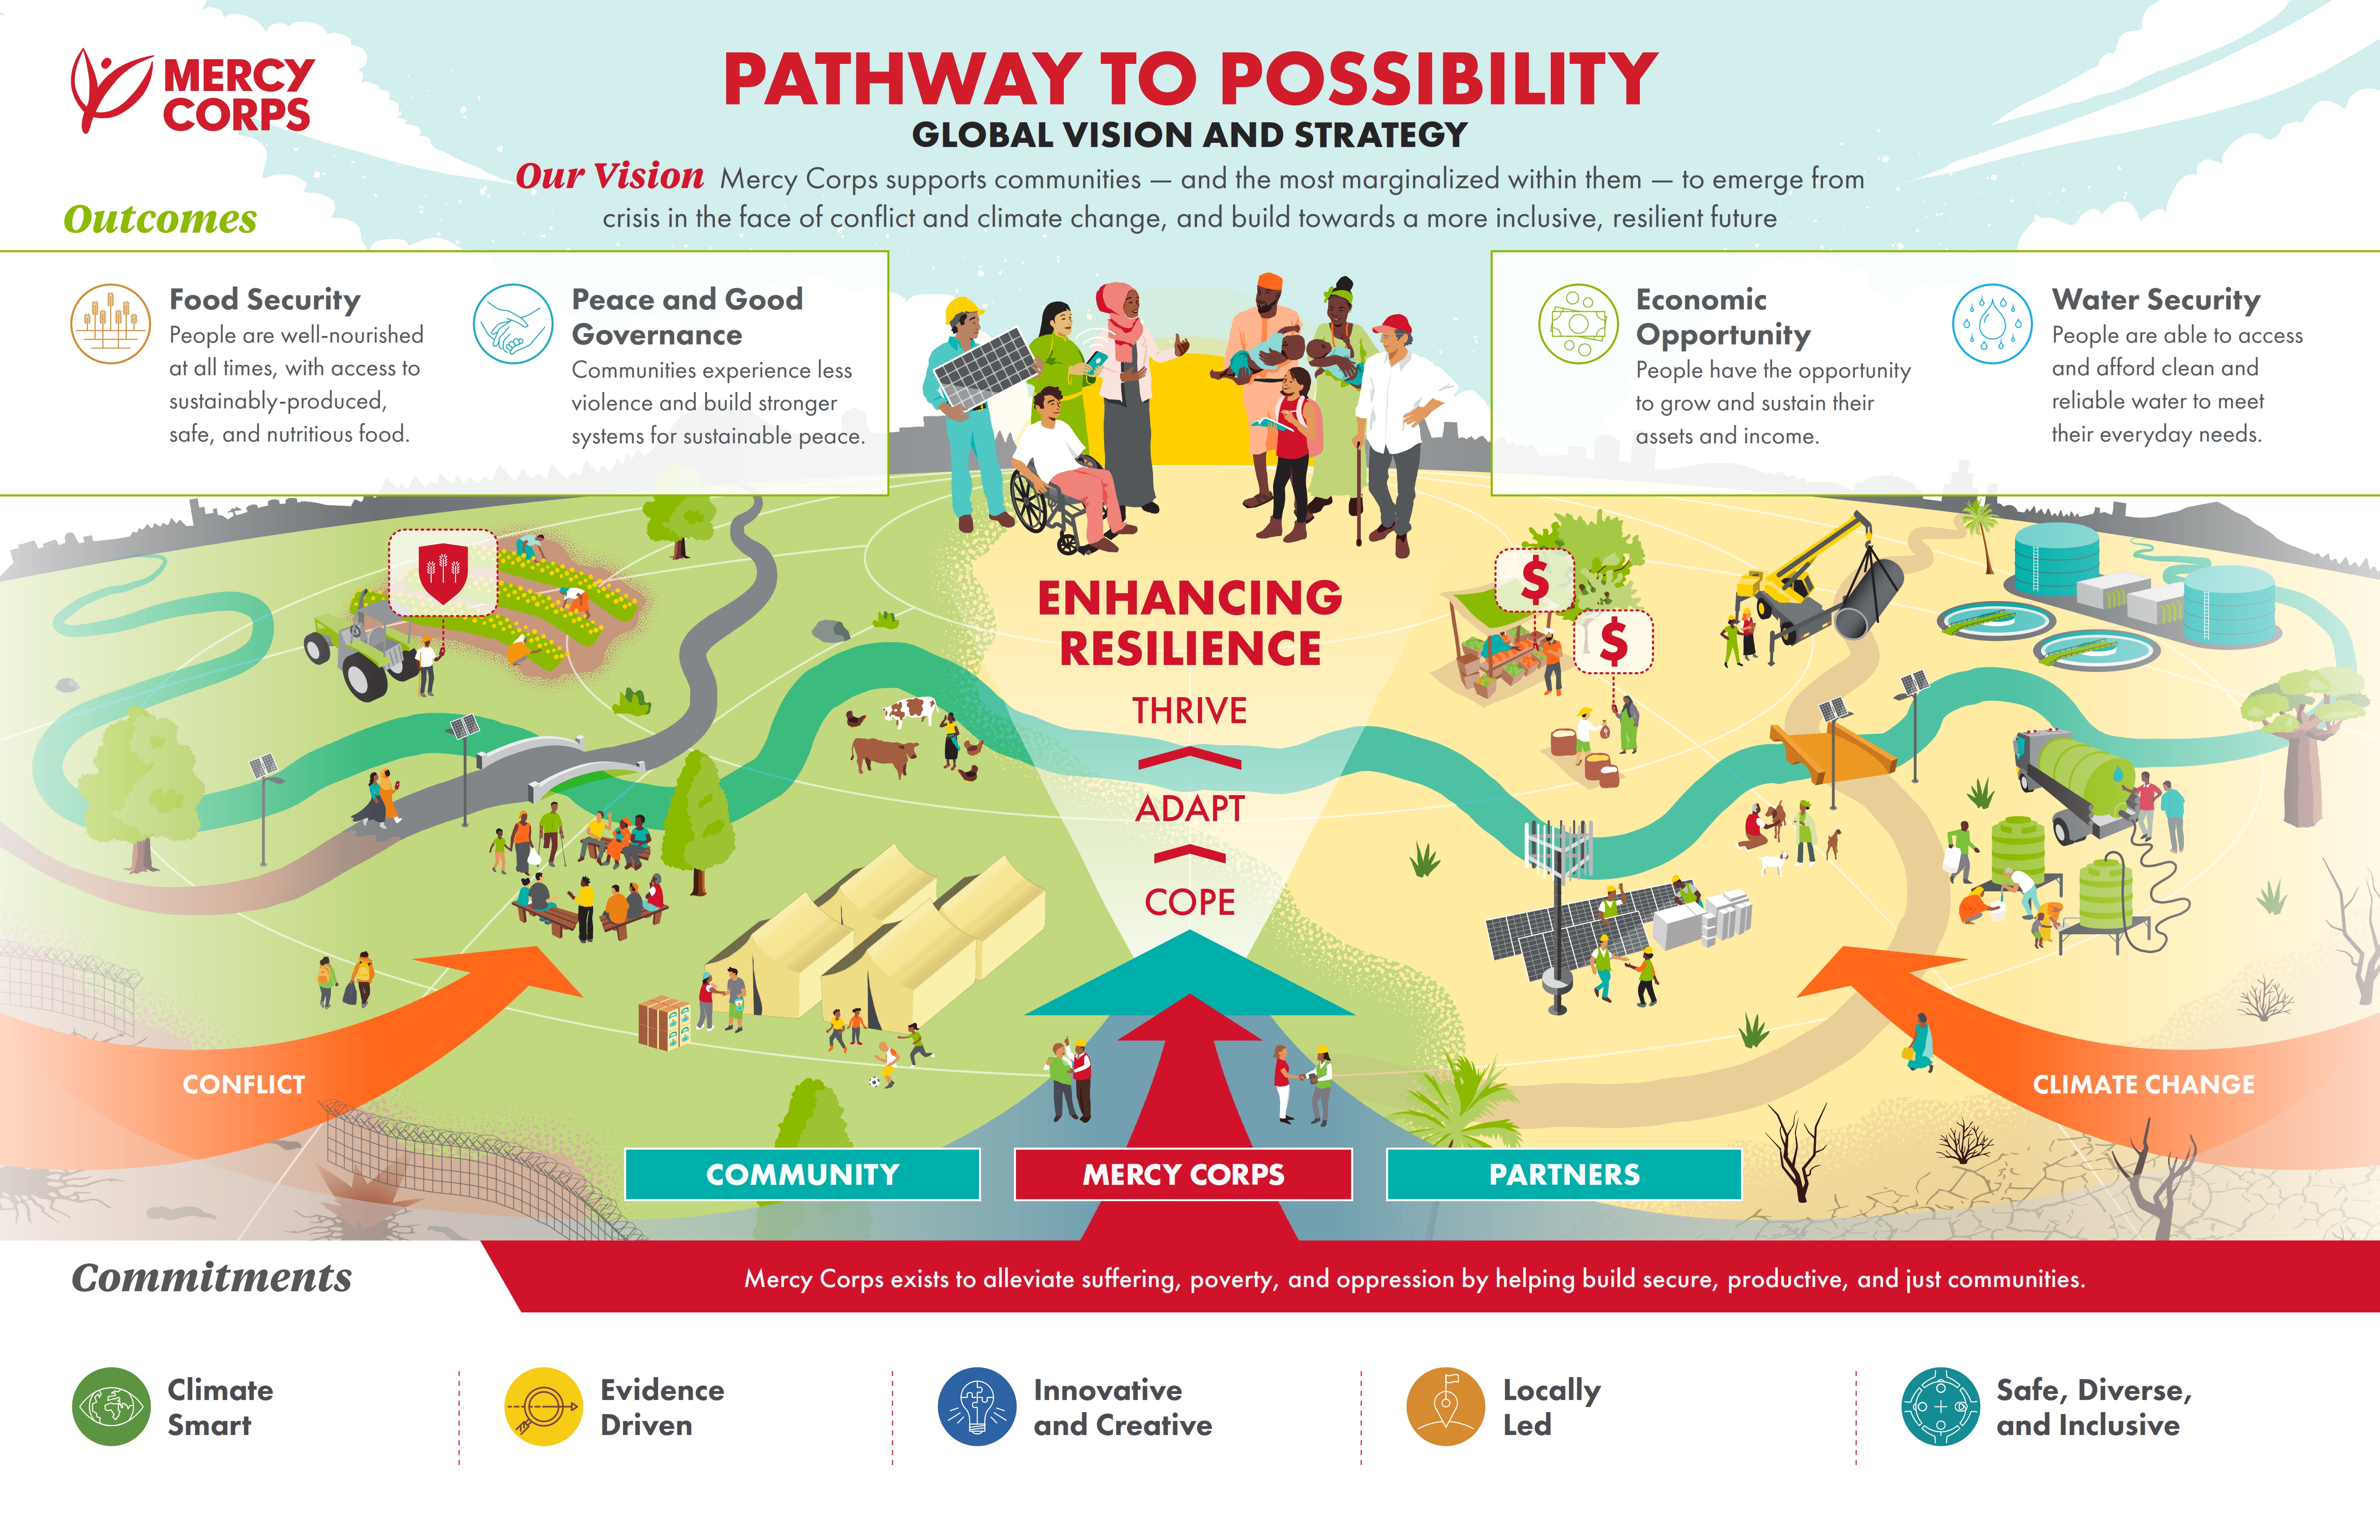 PATHWAY TO POSSIBILITY GLOBAL VISION AND STRATEGY